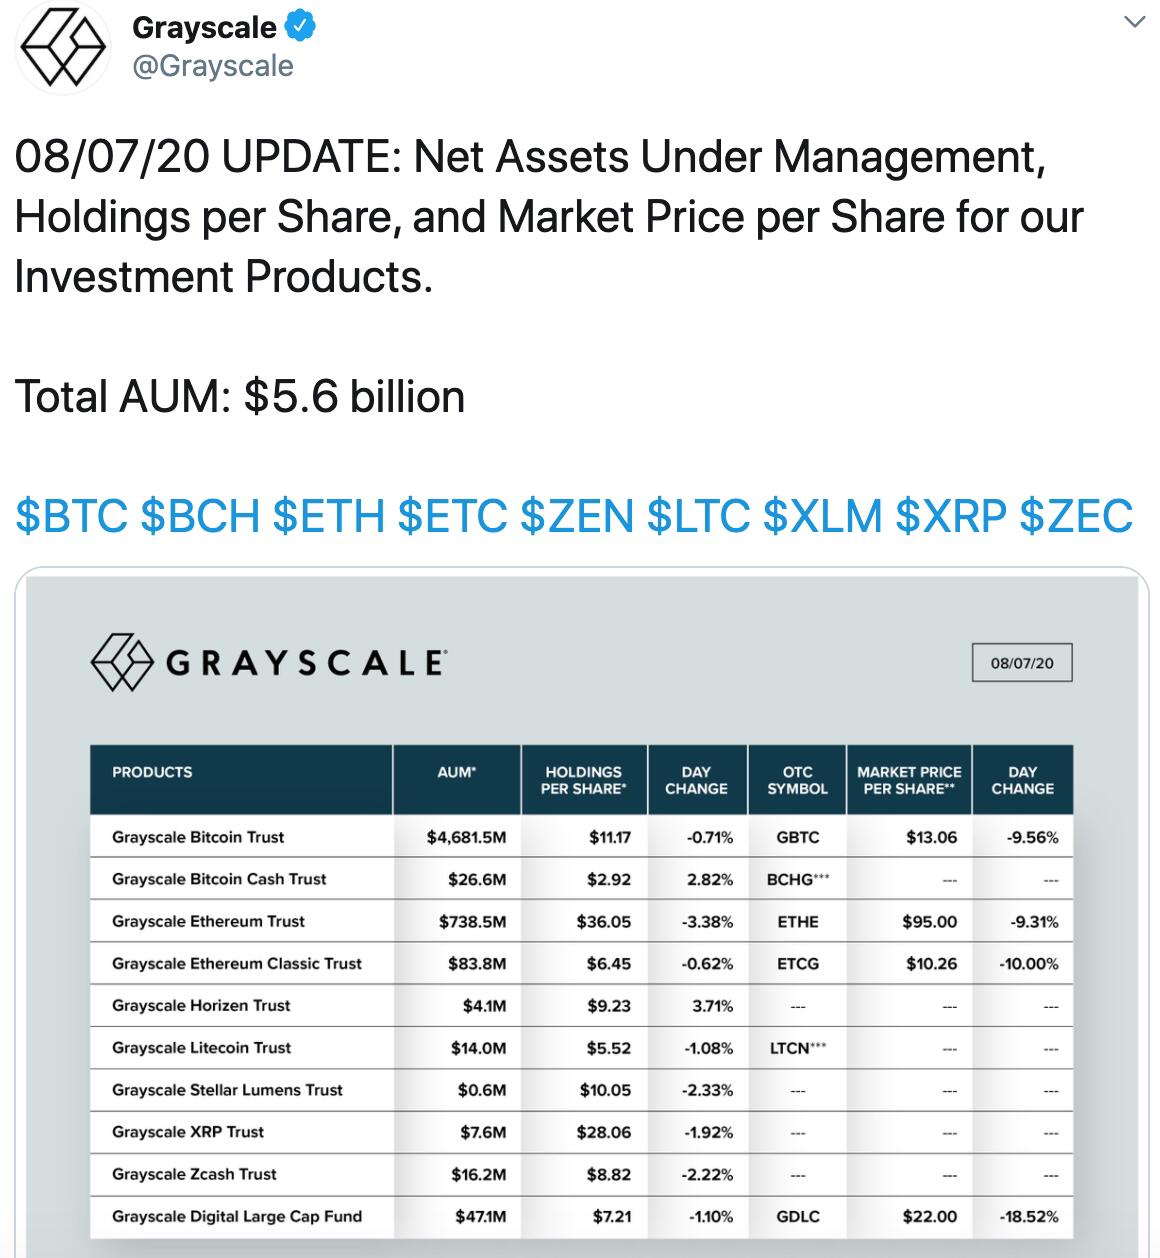 Grayscale total assets under management fell to $ 5.6 billion.